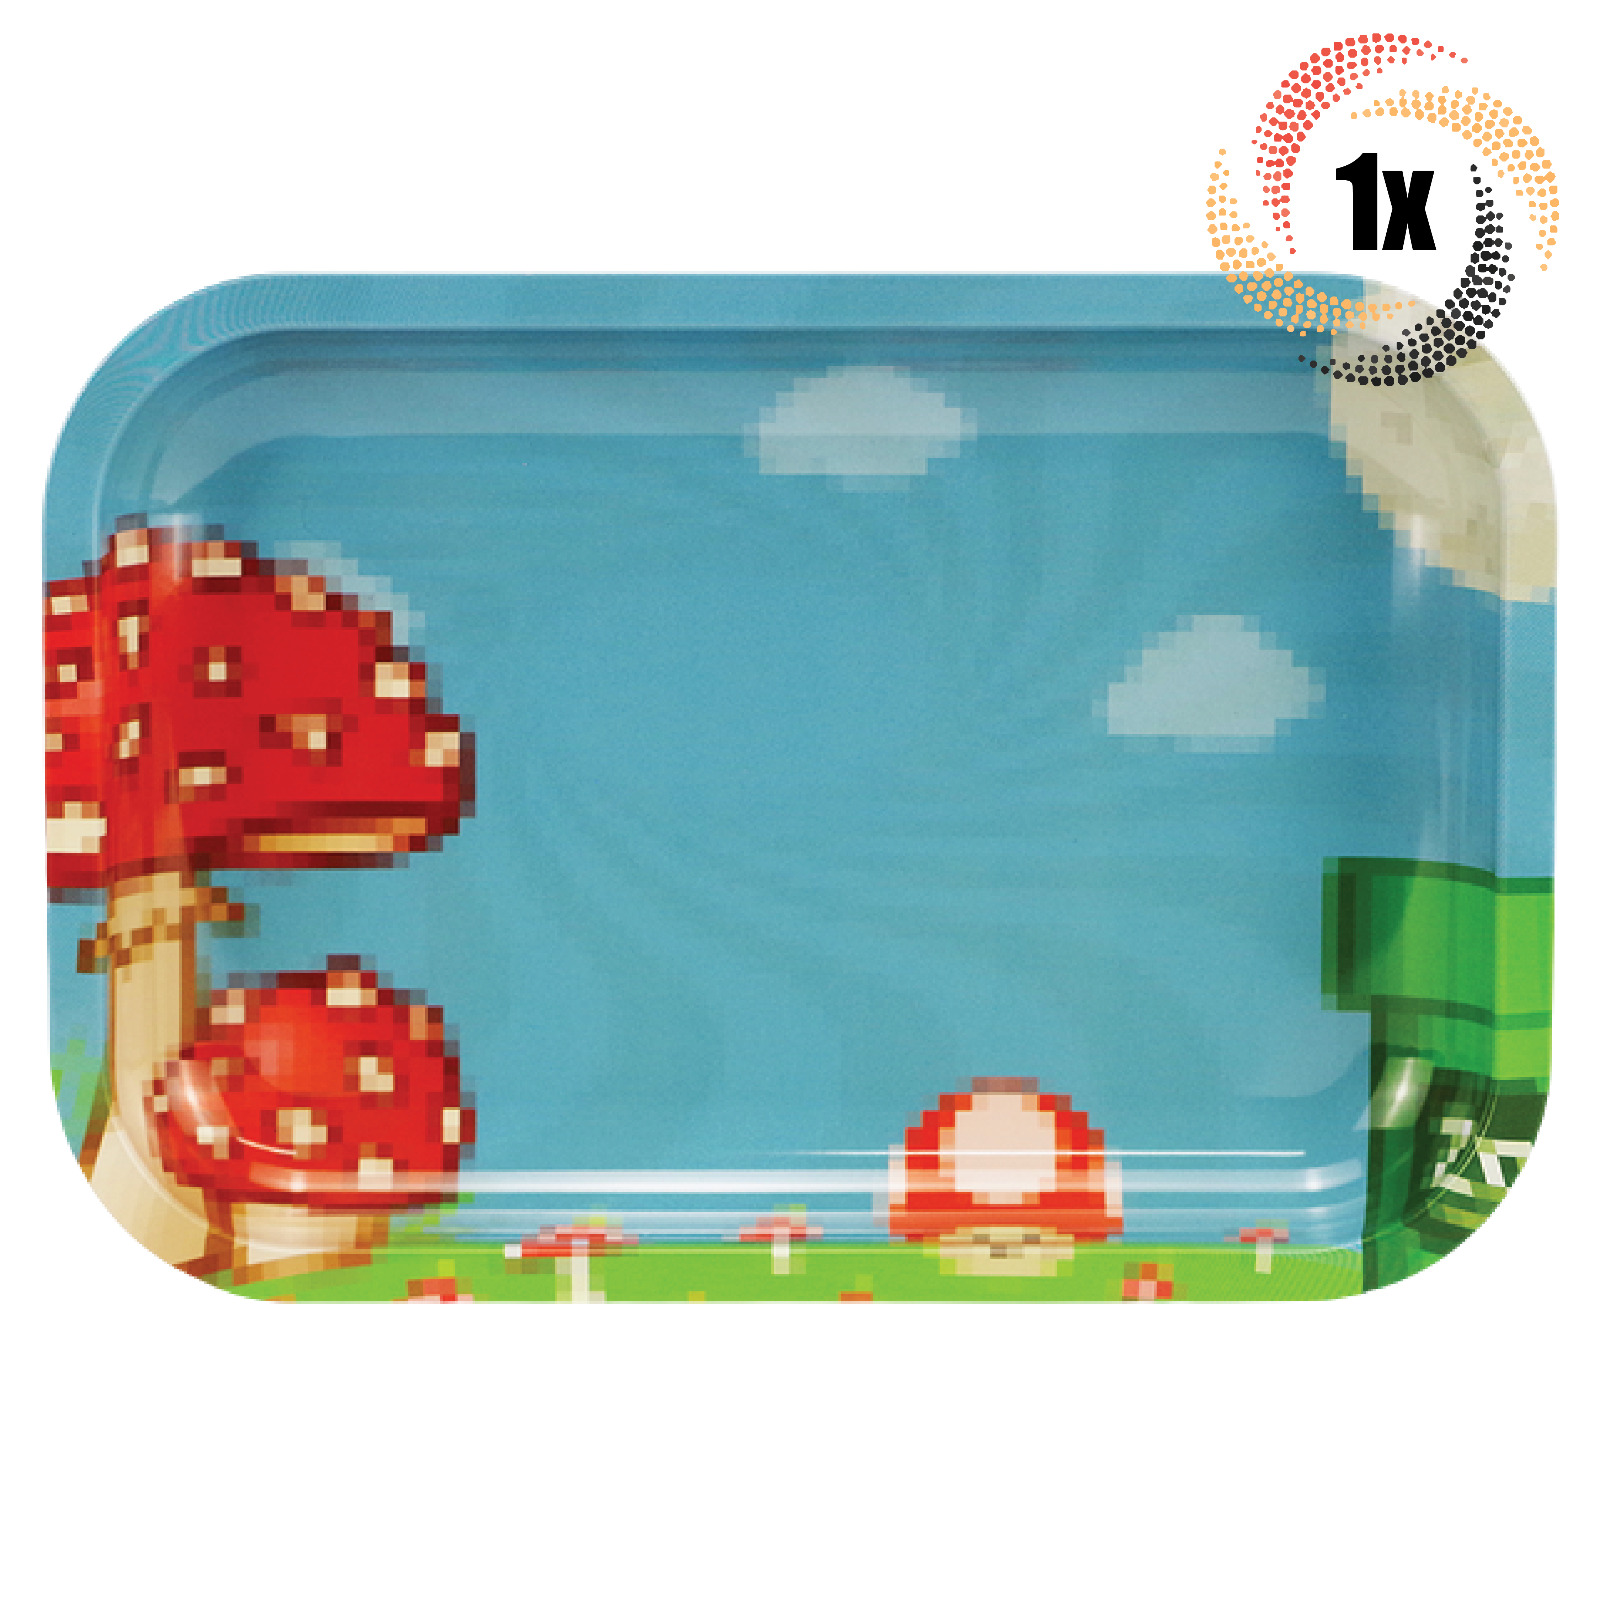 1x Tray Zooted Brandz Metal Rolling Tray Magnetic Lid | Pixel Video Game Design